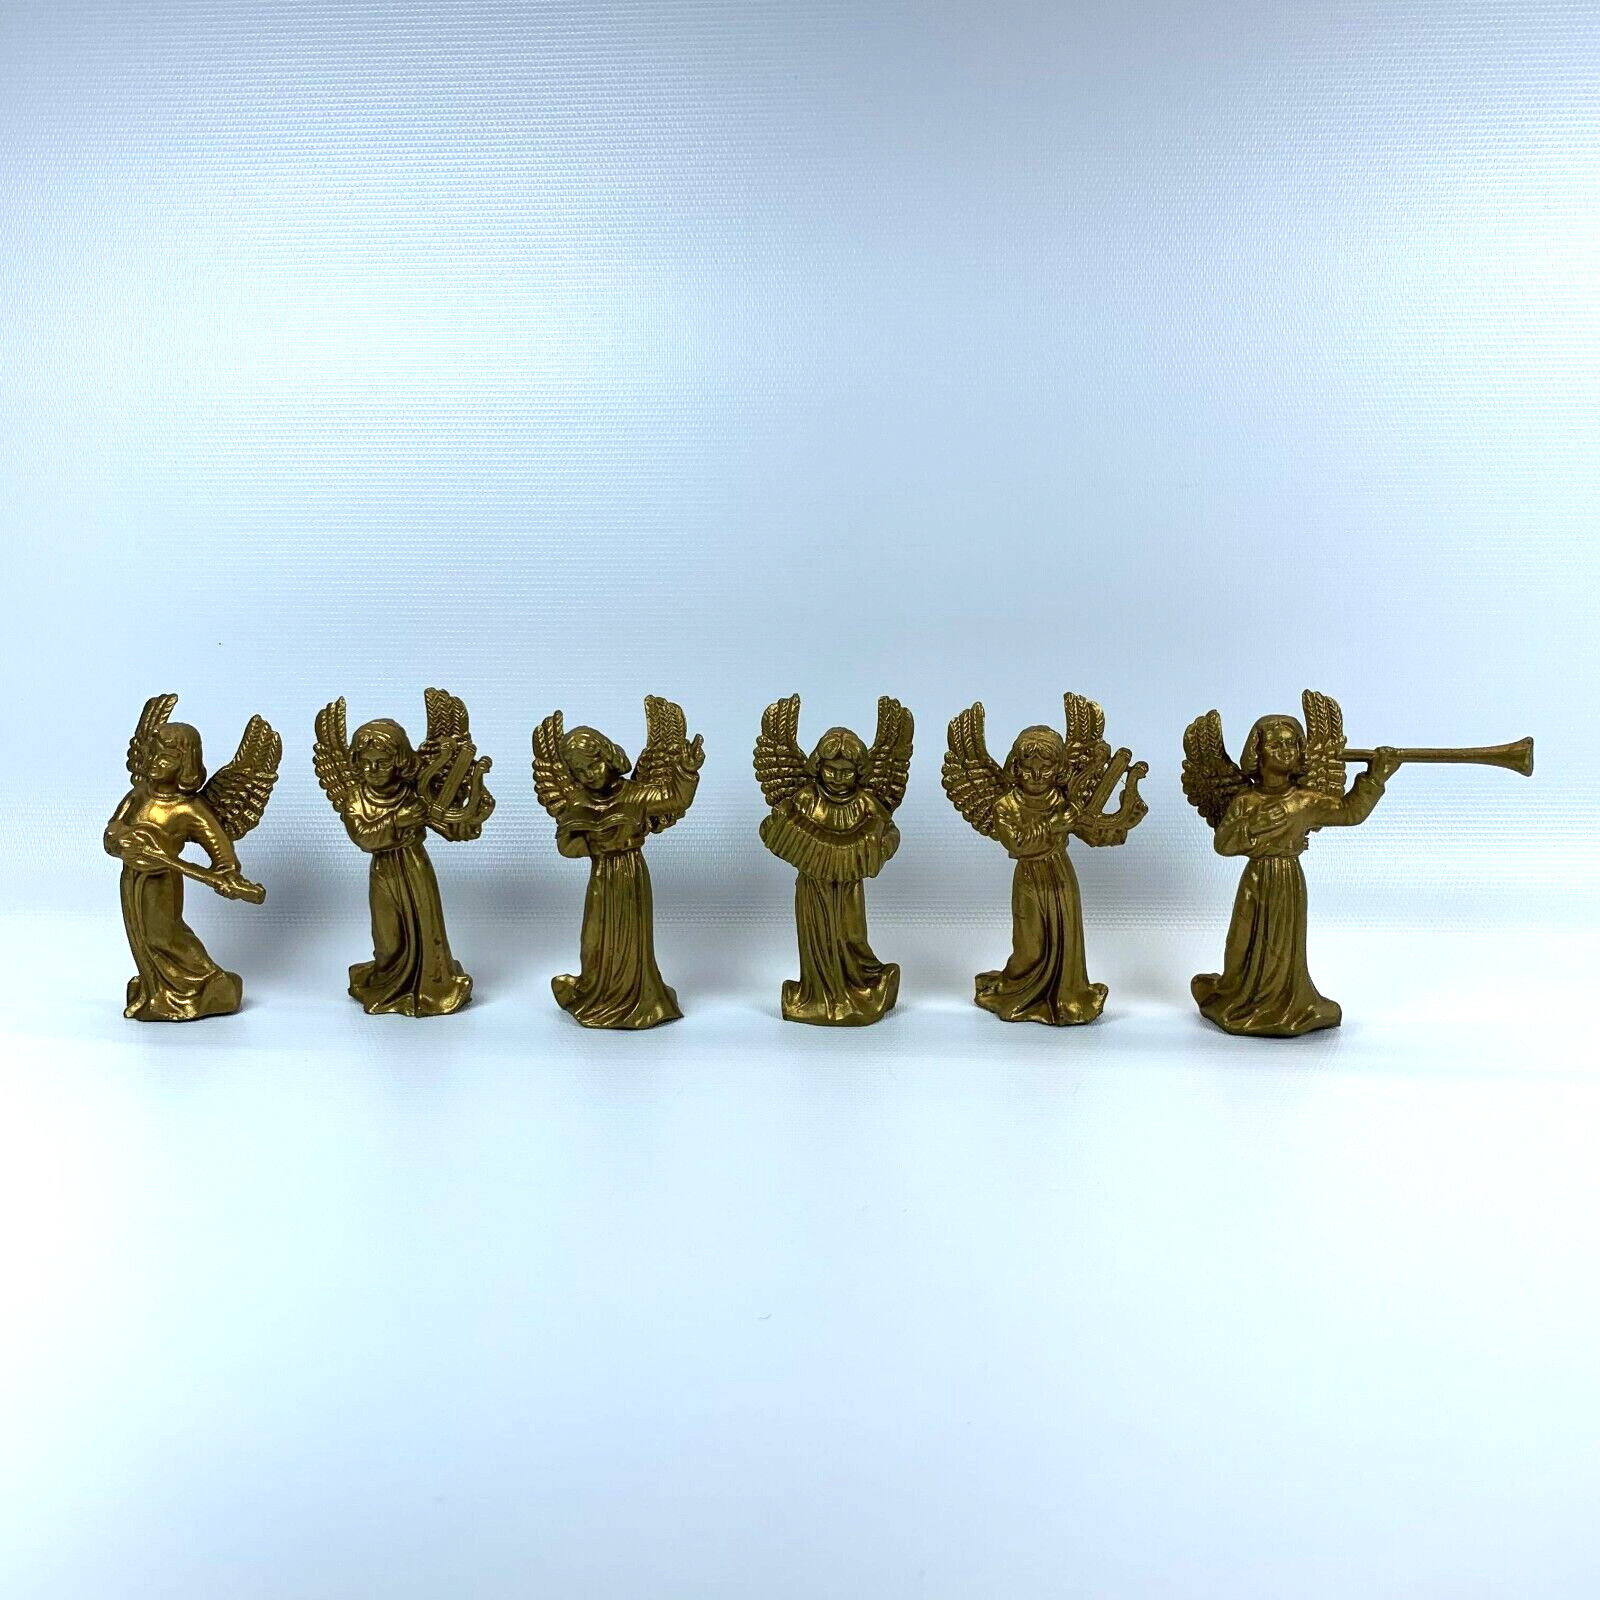 Vintage Gold Miniature Angels Ornament Playing Musical Instrument Lot OF 6